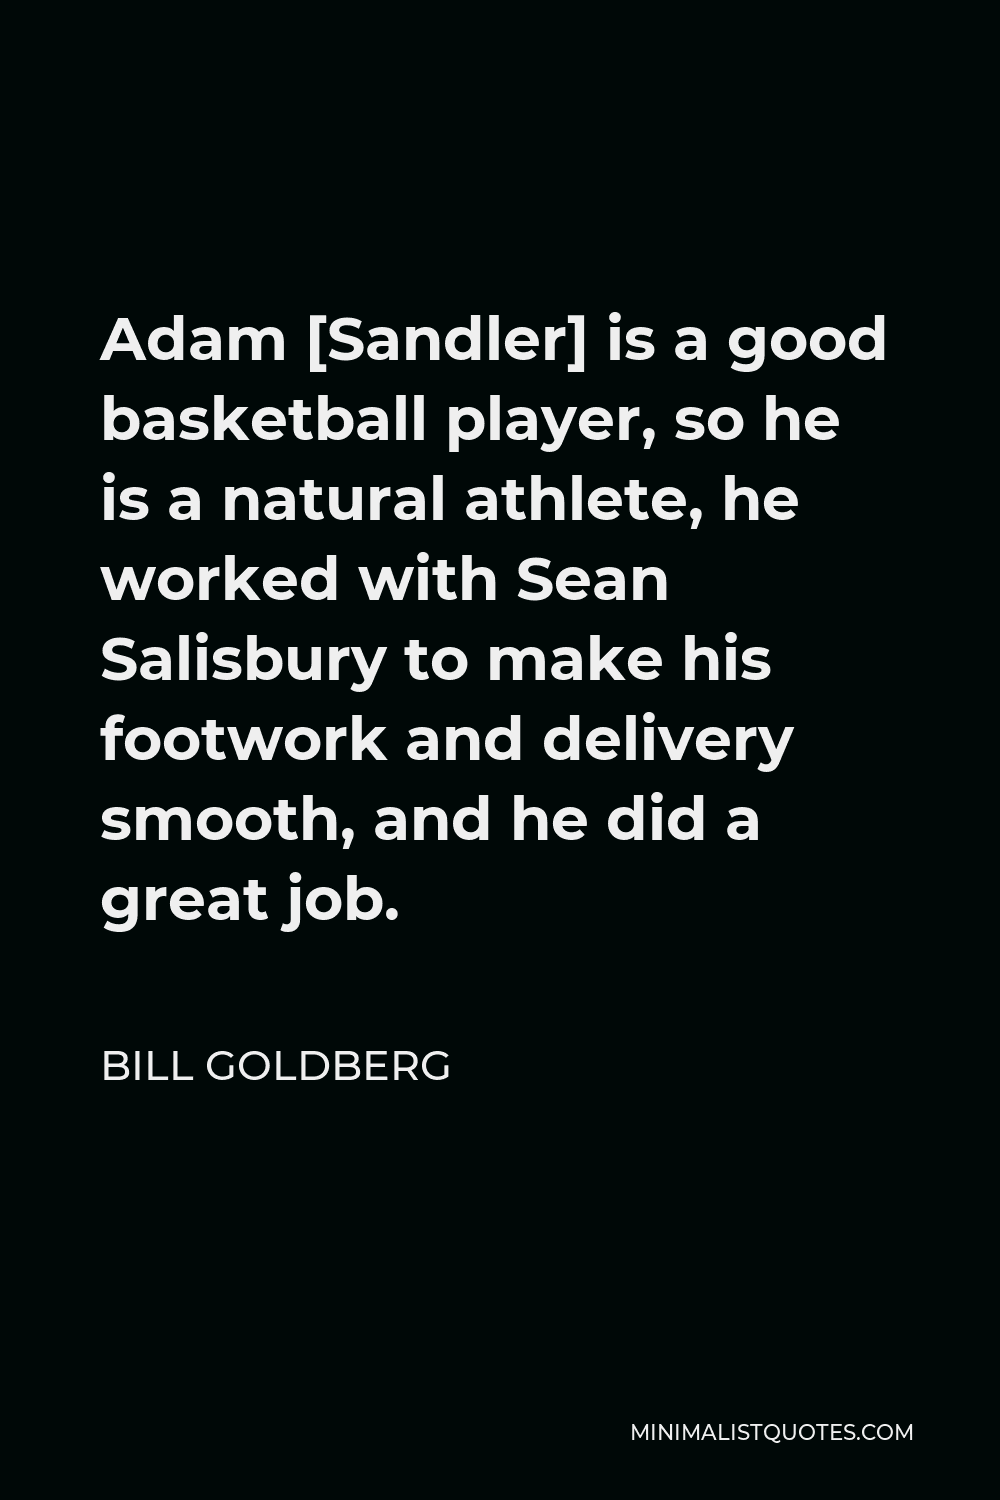 Bill Goldberg Quote - Adam [Sandler] is a good basketball player, so he is a natural athlete, he worked with Sean Salisbury to make his footwork and delivery smooth, and he did a great job.